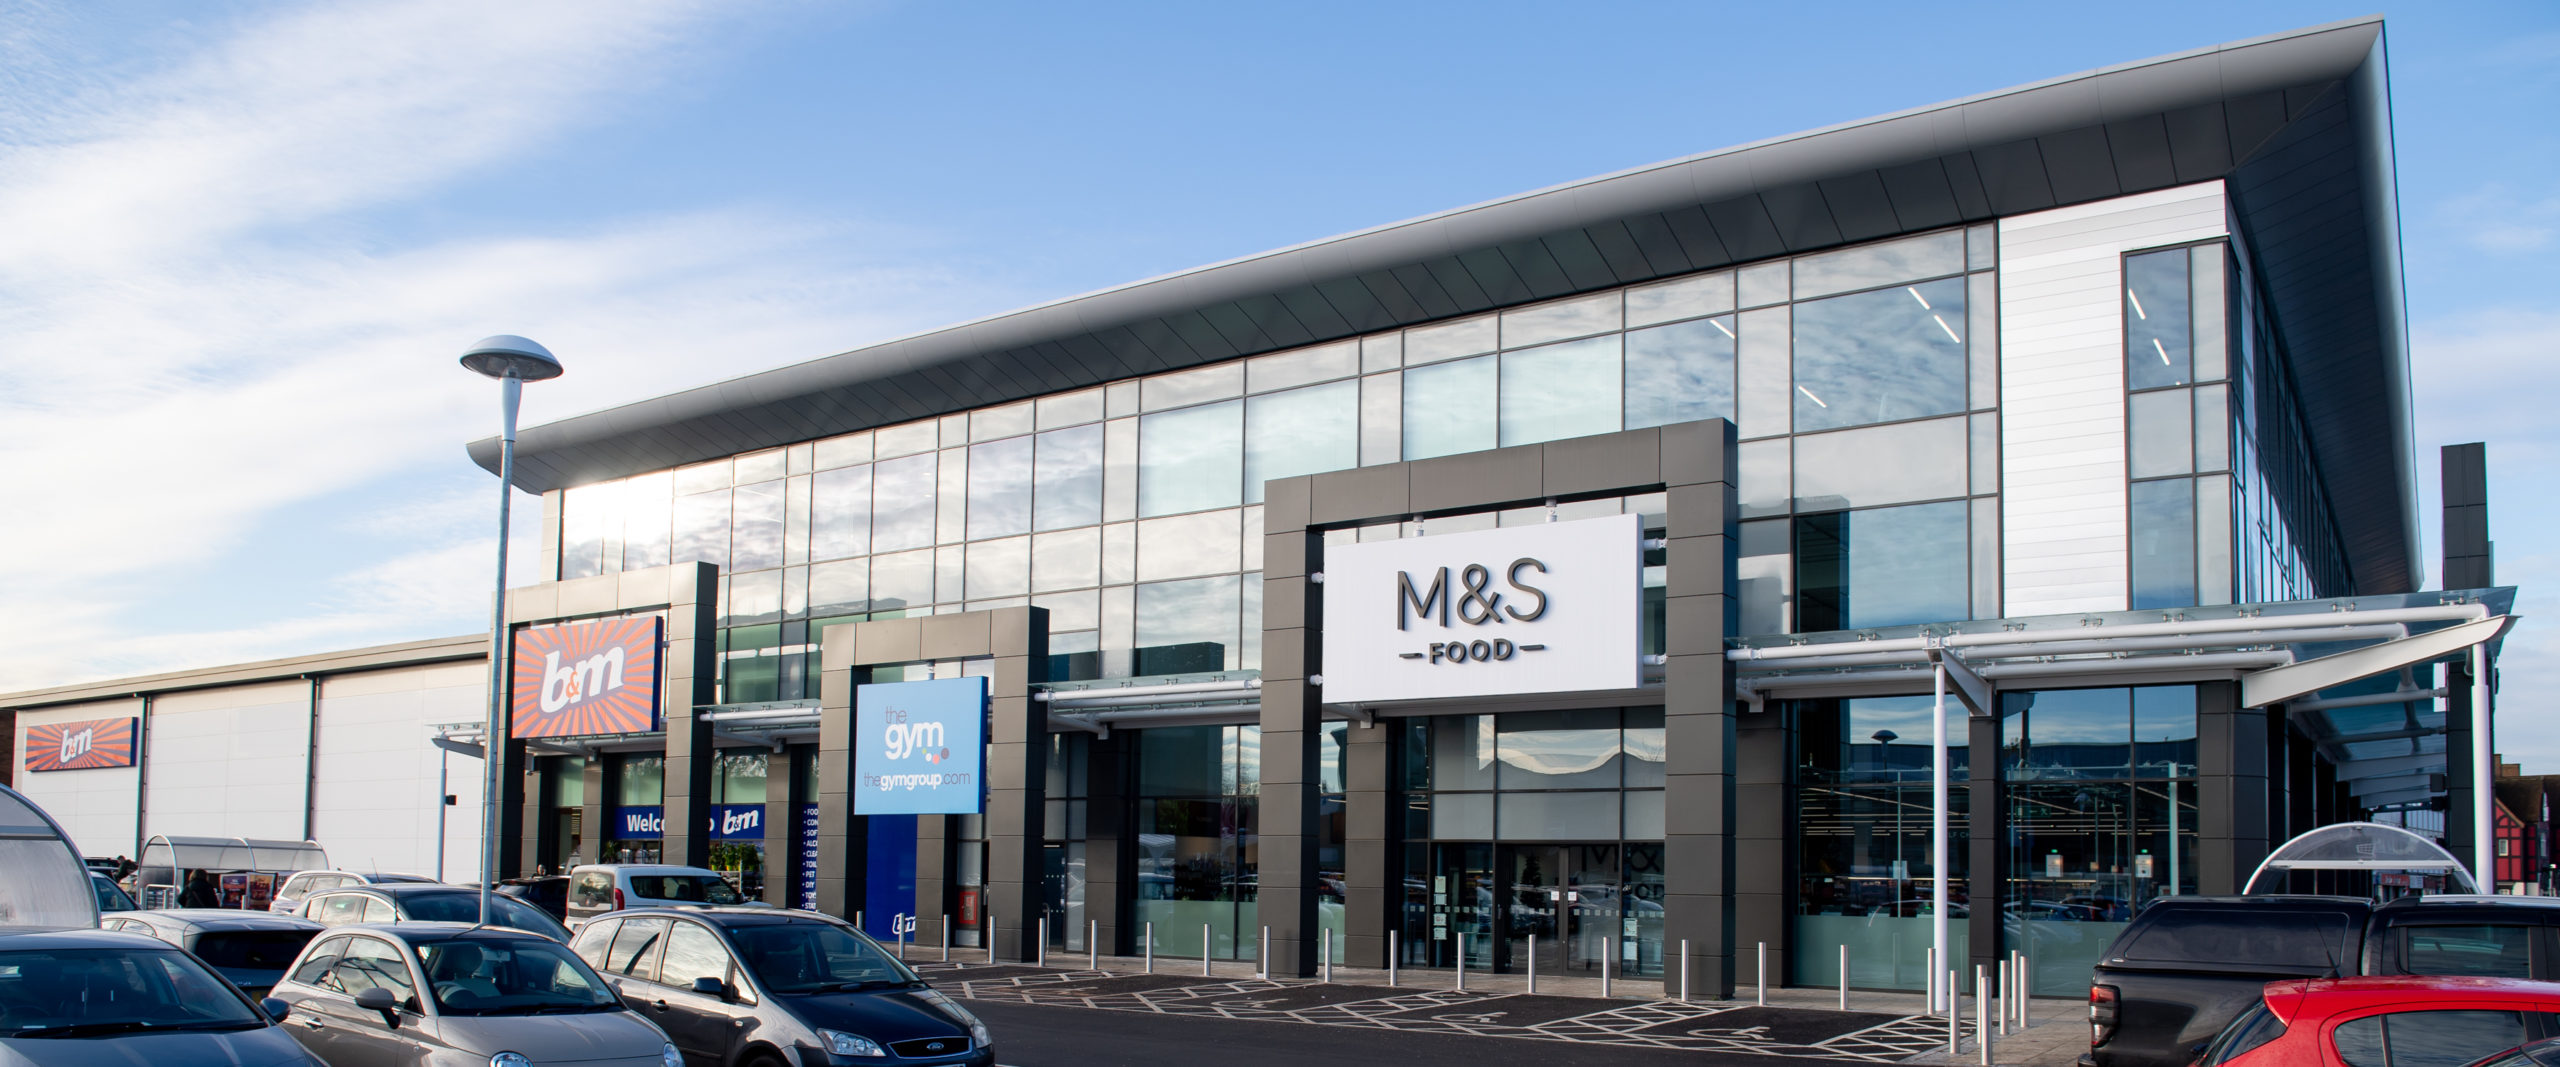 Sheldon Retail Park in Birmingham - out-of-town retail park managed by KWB Property Management